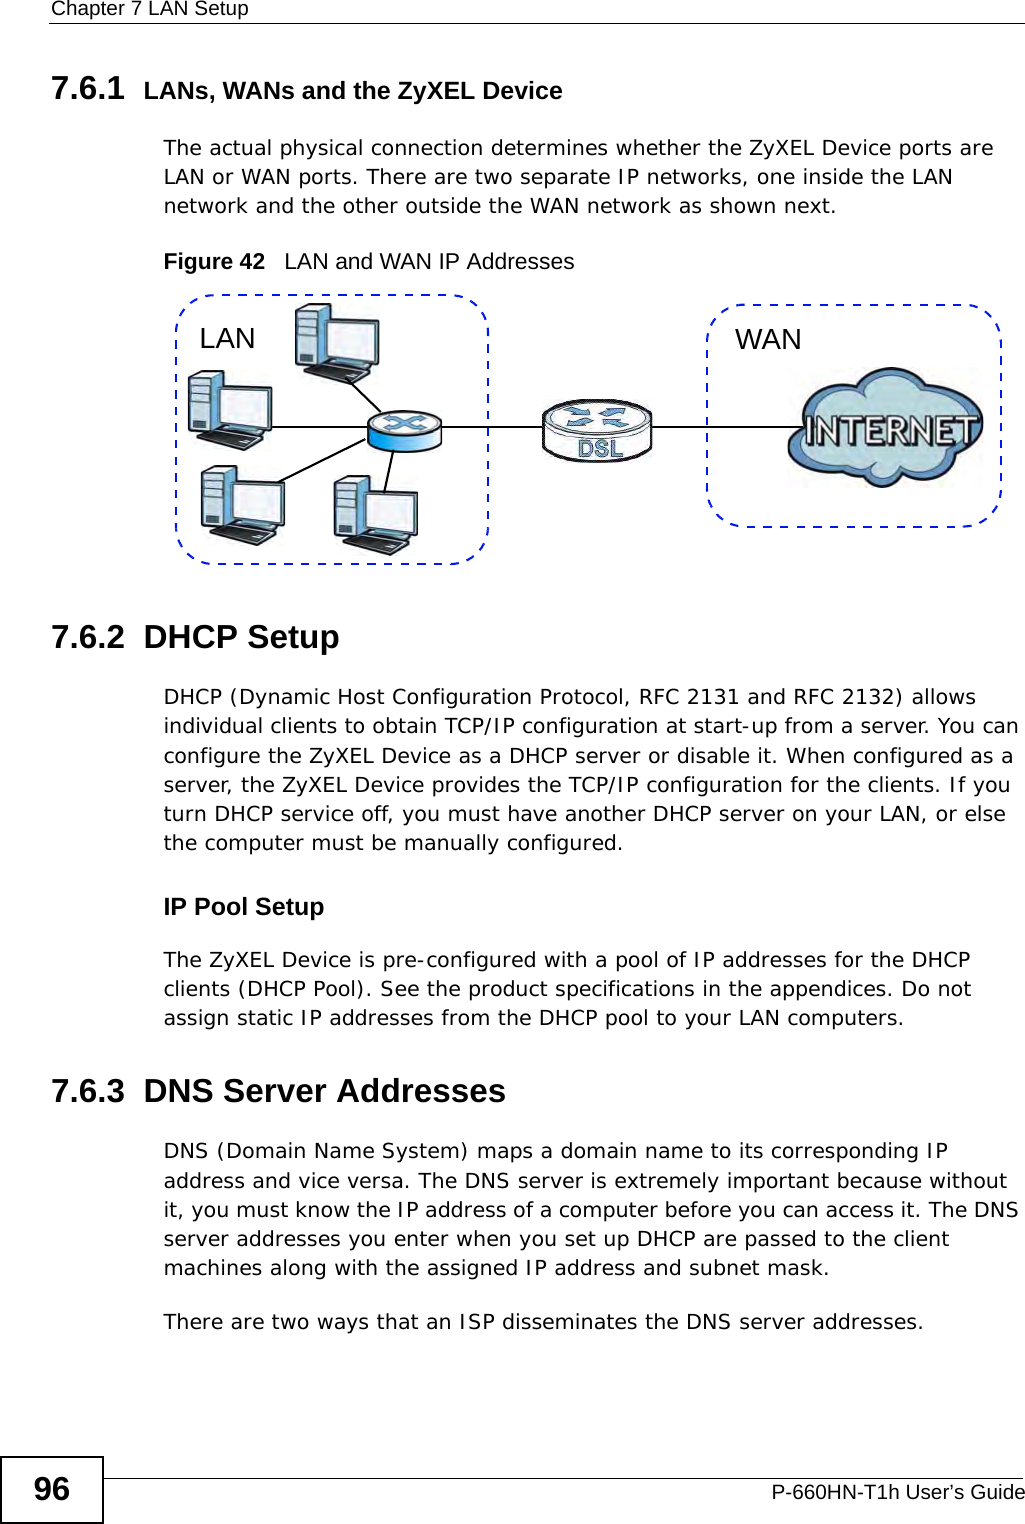 Chapter 7 LAN SetupP-660HN-T1h User’s Guide967.6.1  LANs, WANs and the ZyXEL DeviceThe actual physical connection determines whether the ZyXEL Device ports are LAN or WAN ports. There are two separate IP networks, one inside the LAN network and the other outside the WAN network as shown next.Figure 42   LAN and WAN IP Addresses7.6.2  DHCP SetupDHCP (Dynamic Host Configuration Protocol, RFC 2131 and RFC 2132) allows individual clients to obtain TCP/IP configuration at start-up from a server. You can configure the ZyXEL Device as a DHCP server or disable it. When configured as a server, the ZyXEL Device provides the TCP/IP configuration for the clients. If you turn DHCP service off, you must have another DHCP server on your LAN, or else the computer must be manually configured. IP Pool SetupThe ZyXEL Device is pre-configured with a pool of IP addresses for the DHCP clients (DHCP Pool). See the product specifications in the appendices. Do not assign static IP addresses from the DHCP pool to your LAN computers.7.6.3  DNS Server Addresses DNS (Domain Name System) maps a domain name to its corresponding IP address and vice versa. The DNS server is extremely important because without it, you must know the IP address of a computer before you can access it. The DNS server addresses you enter when you set up DHCP are passed to the client machines along with the assigned IP address and subnet mask.There are two ways that an ISP disseminates the DNS server addresses. WANLAN